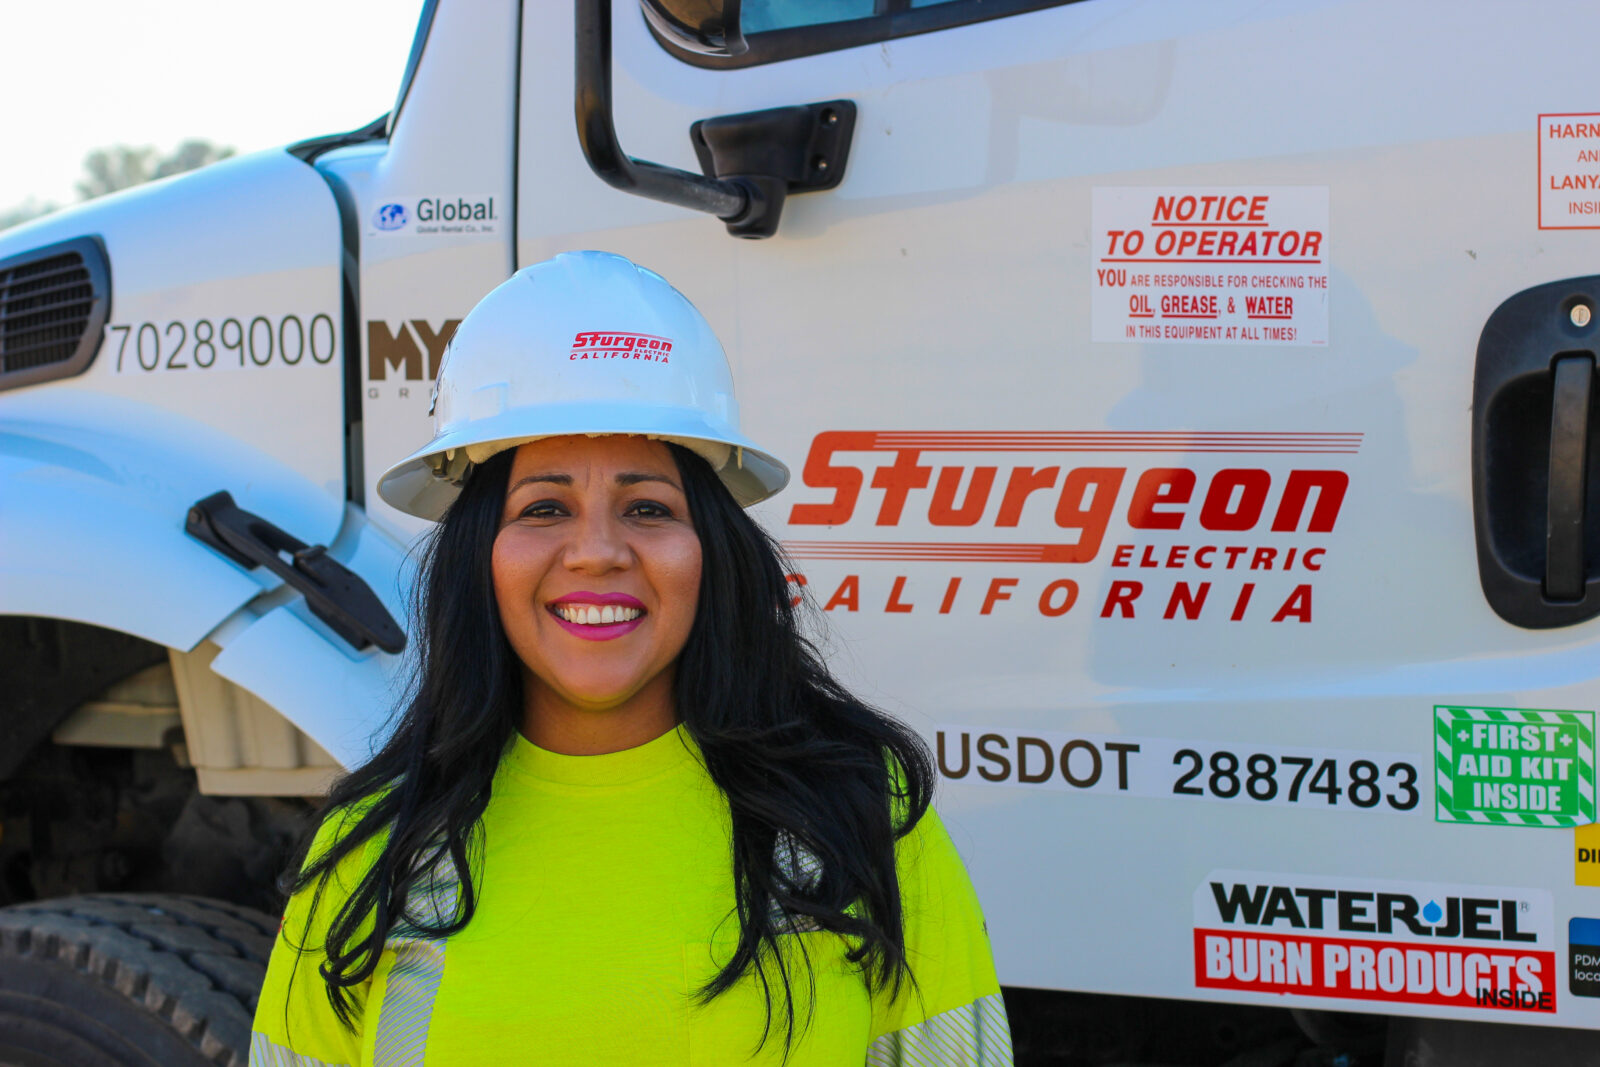 Jessica Pelayo poses for a photo in front of a Sturgeon Electric truck